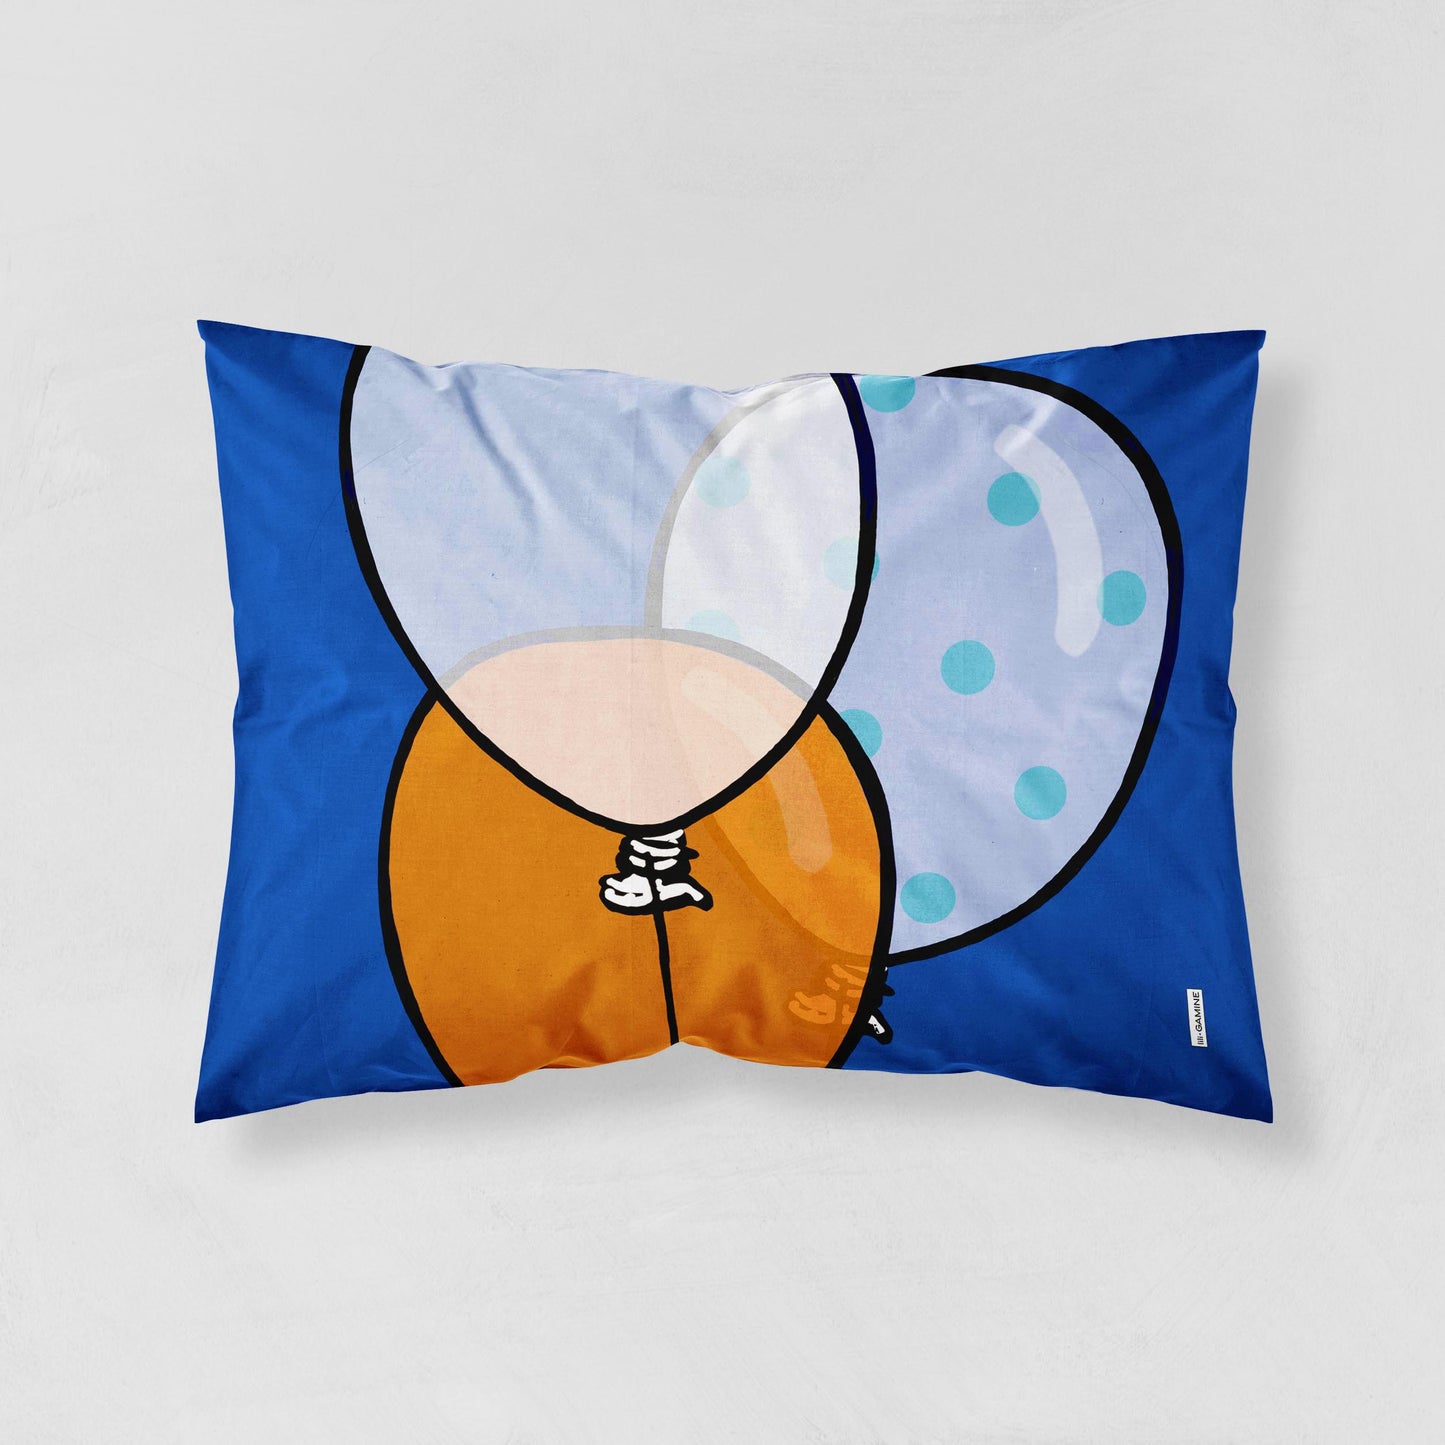 Balloon Illustrations on a Pillow Cover